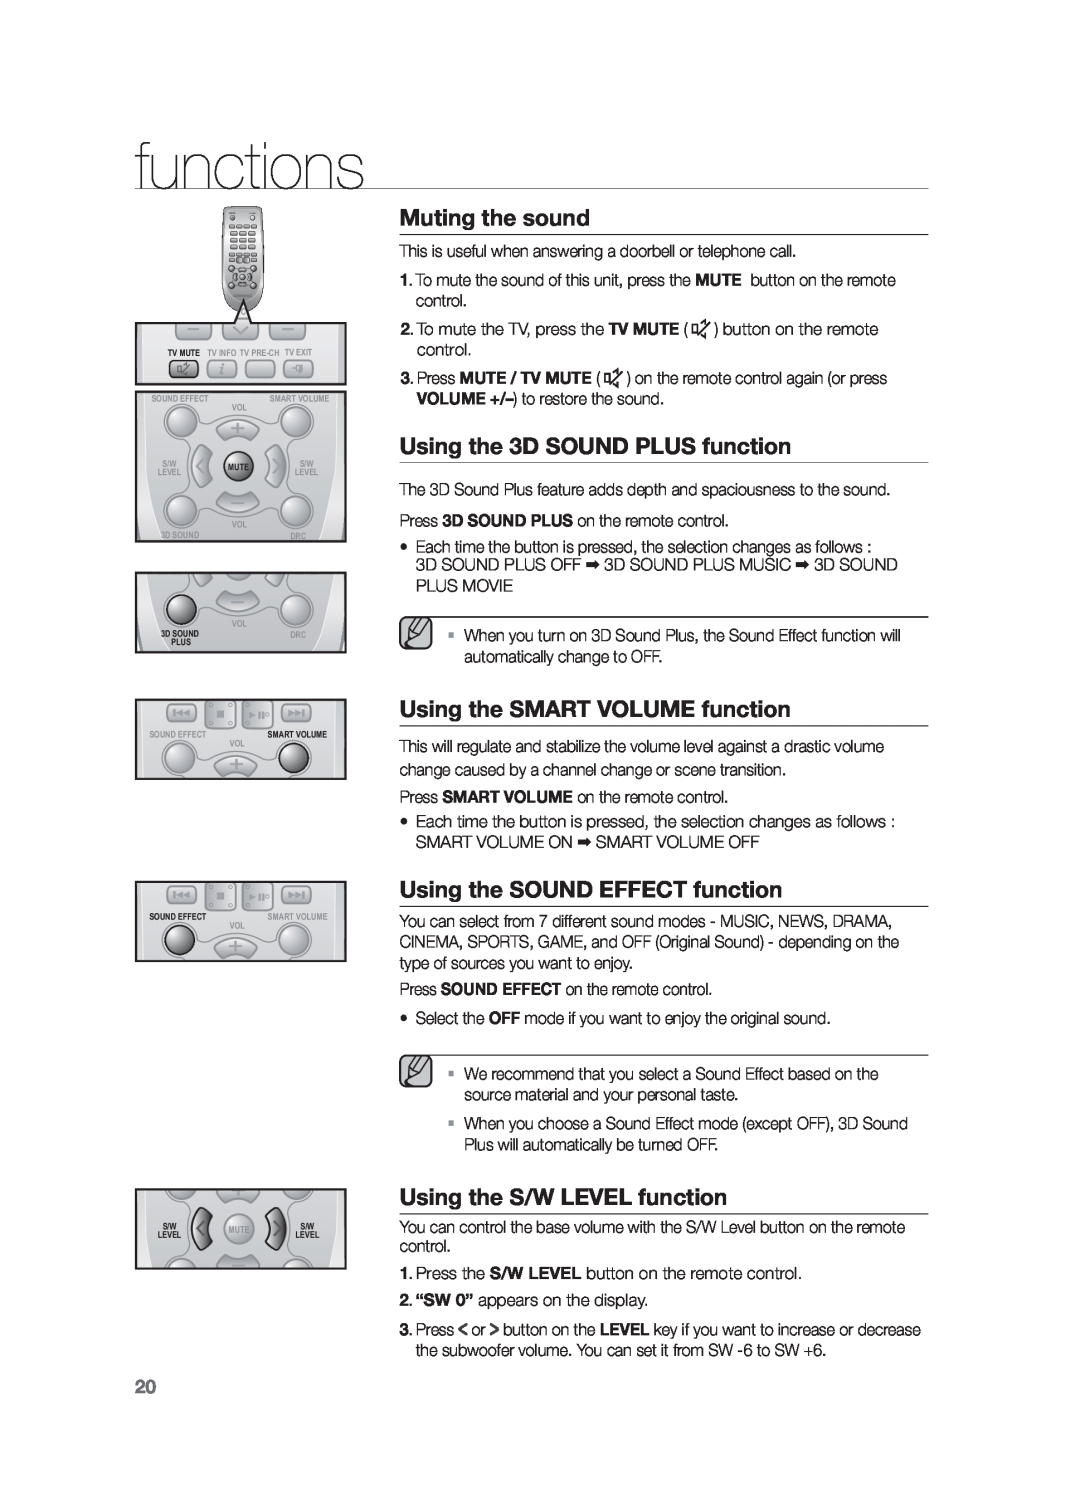 Samsung HW-F550/ZF manual Muting the sound, Using the 3D SOUND PLUS function, Using the SMART VOLUME function, functions 